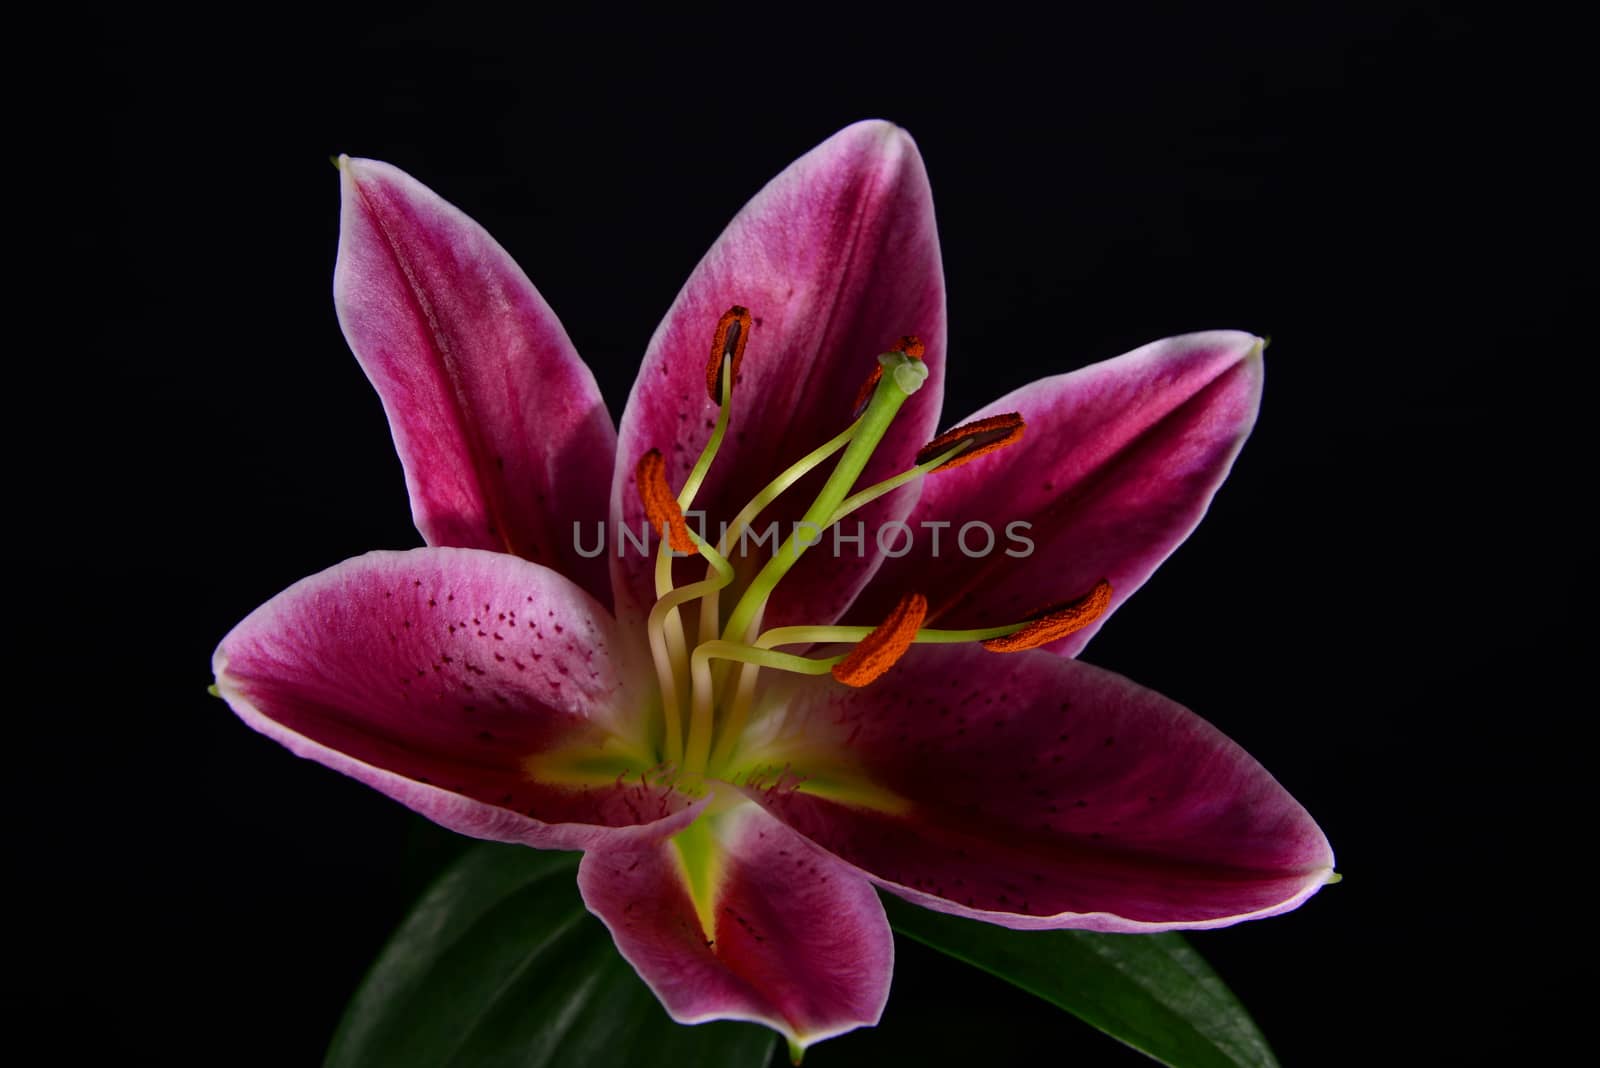 Photo of a purple lily over a black background. Taken in Riga, Latvia.